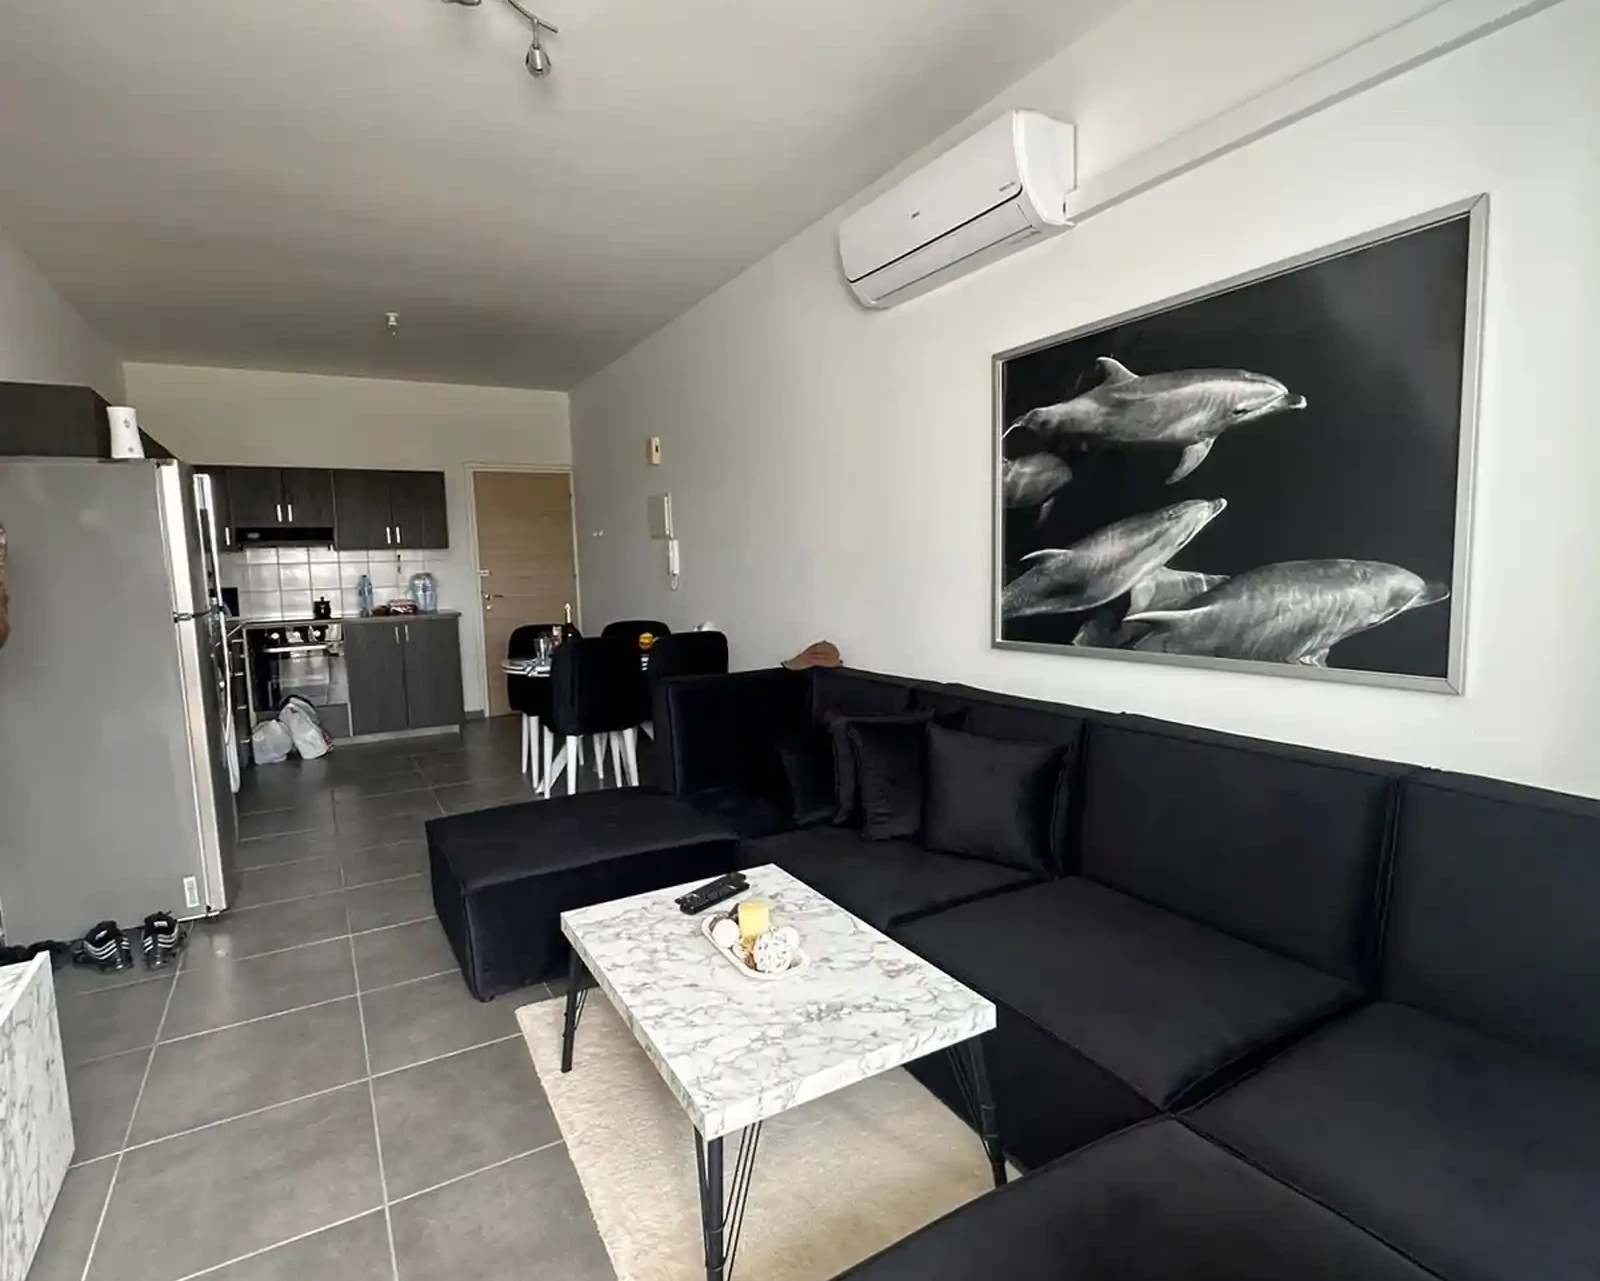 2-bedroom apartment to rent €1.300, image 1